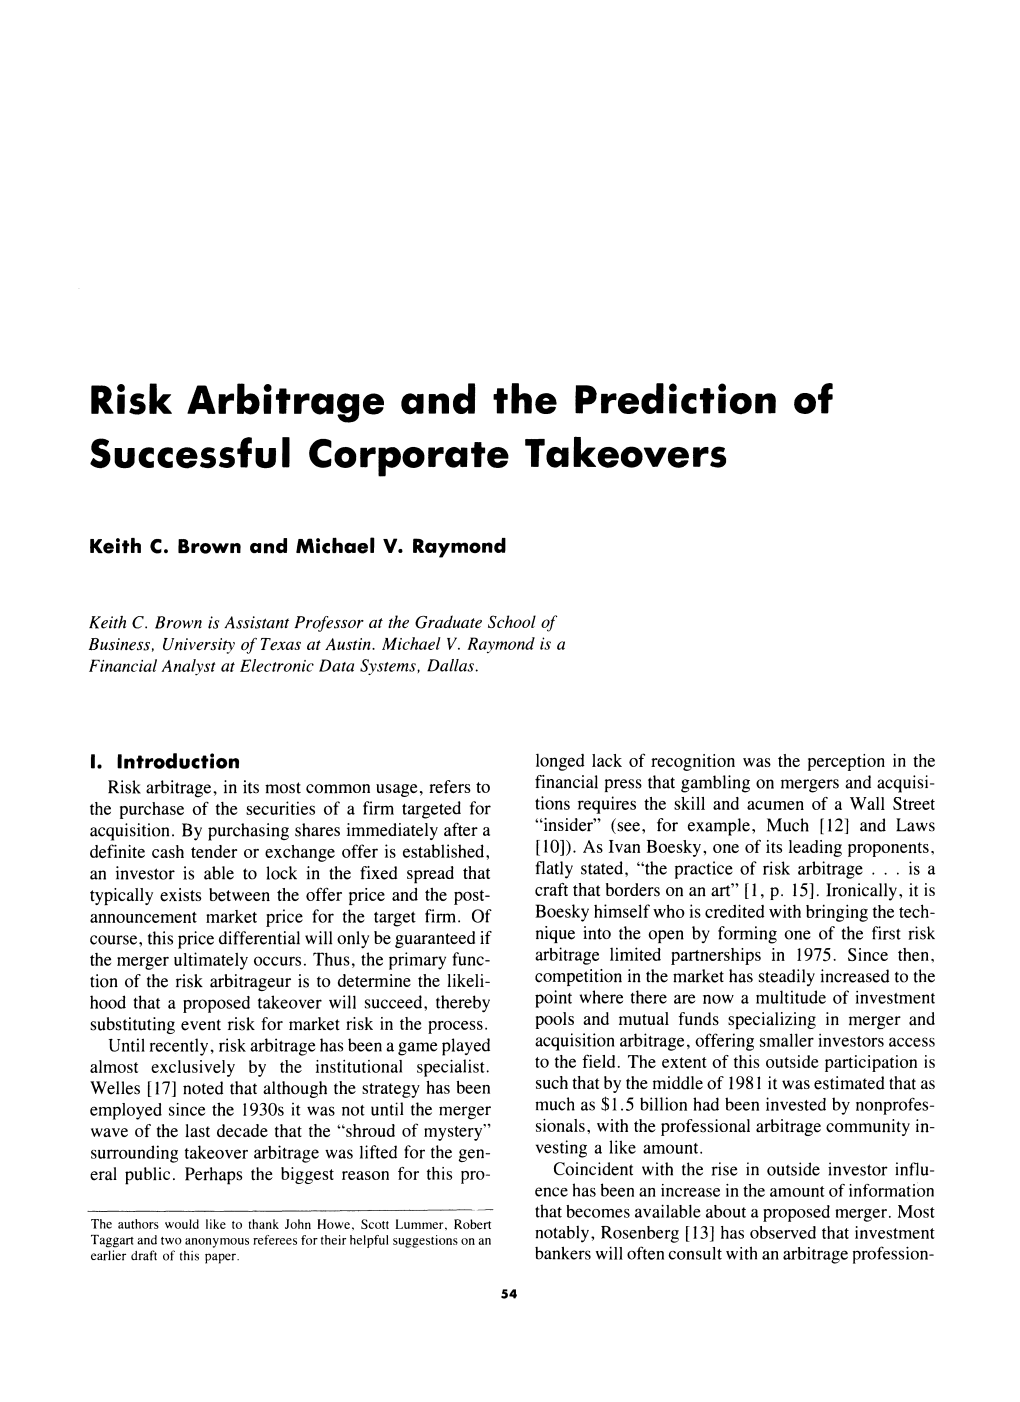 Risk Arbitrage and the Prediction of Successful Corporate Takeovers